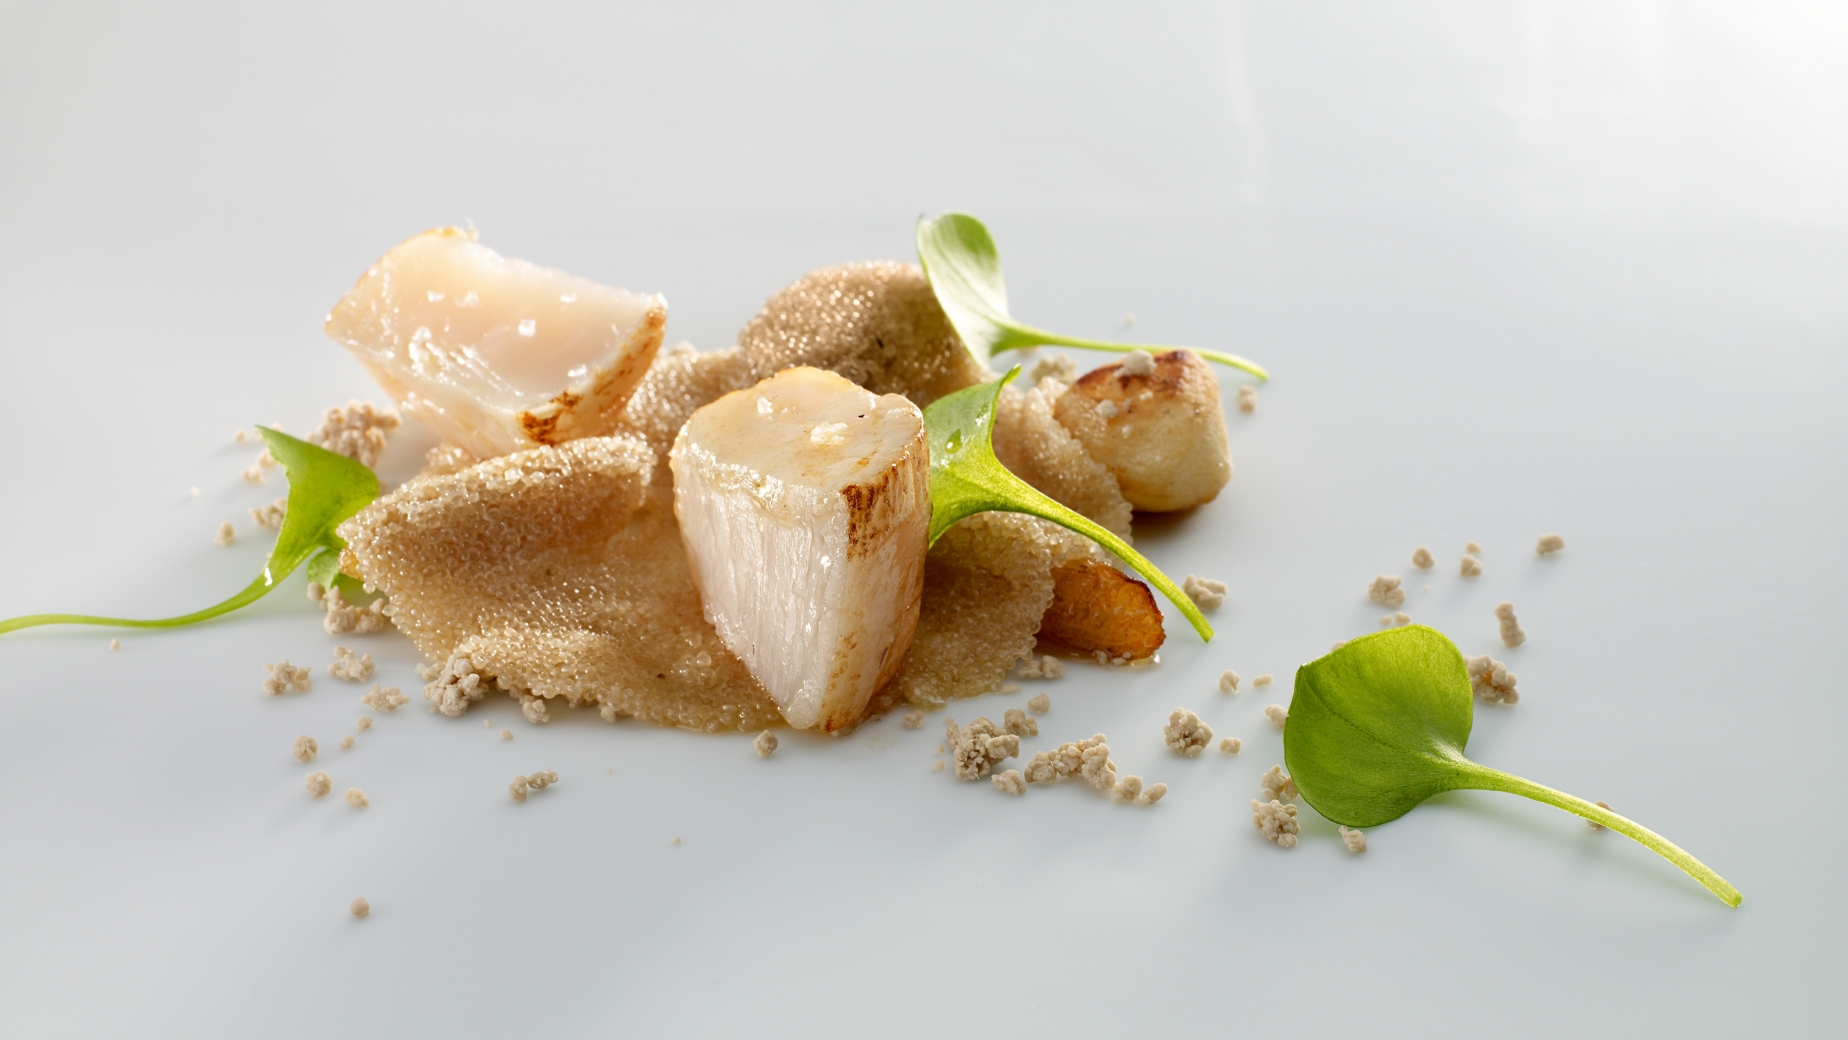 Roasted scallops and tubers covered with amaranth,  slices of sweet acorn and winter purslane, with a clay and truffle juice dressing
PHOTO: José Luis López de Zubiría / Mugaritz